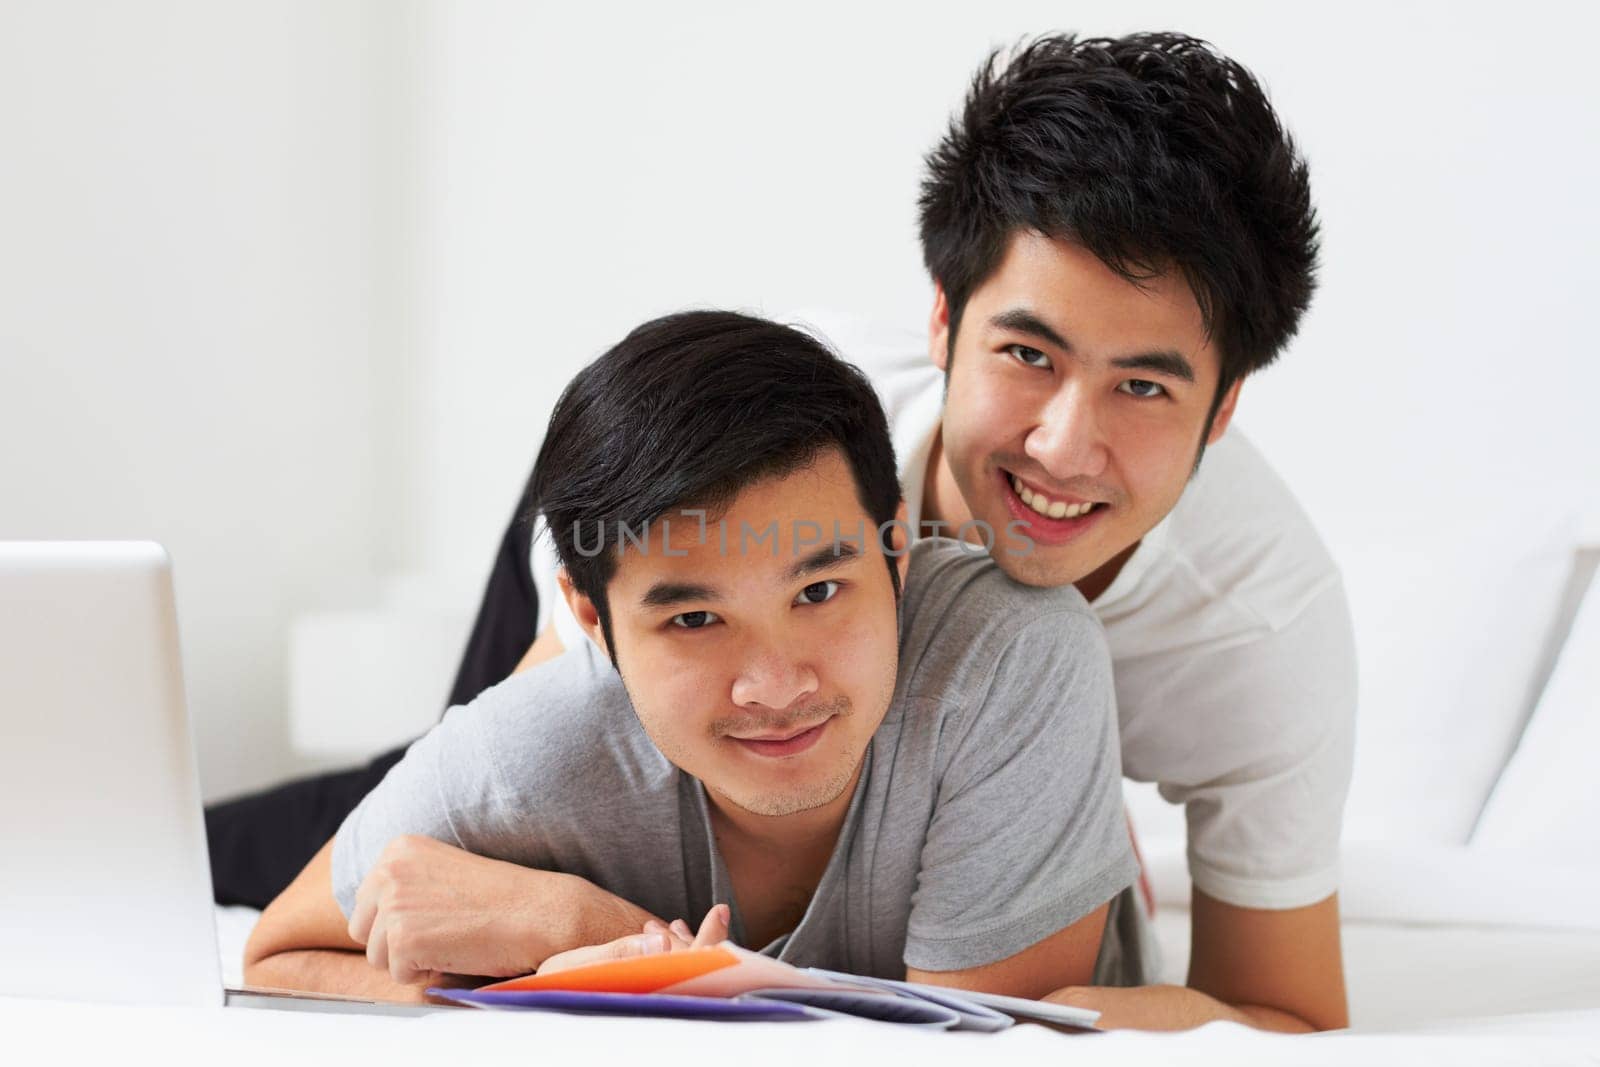 Portrait, lgbt and love with an asian couple learning together in their home while bonding over education. Study, happy or smile with a gay man and partner in a house, studying as university students.